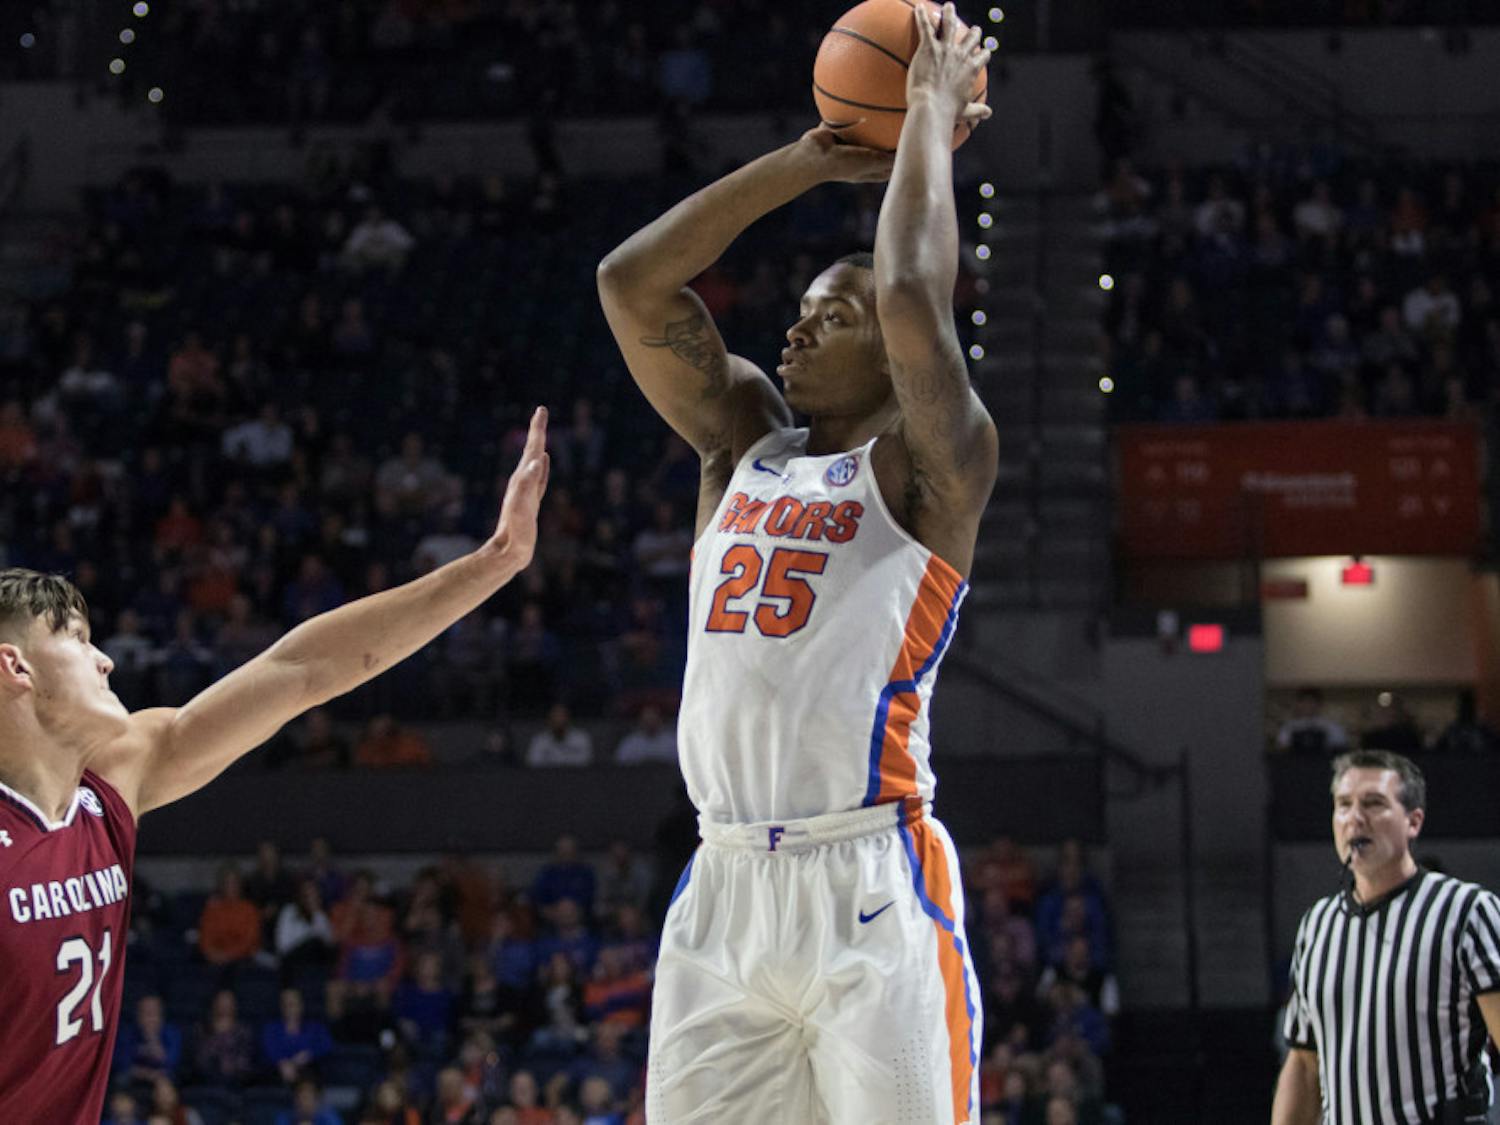 Forward Keith Stone was part of a resurgent defensive effort from the Gators against South Carolina. The sophomore finished with three blocks on the afternoon.&nbsp;